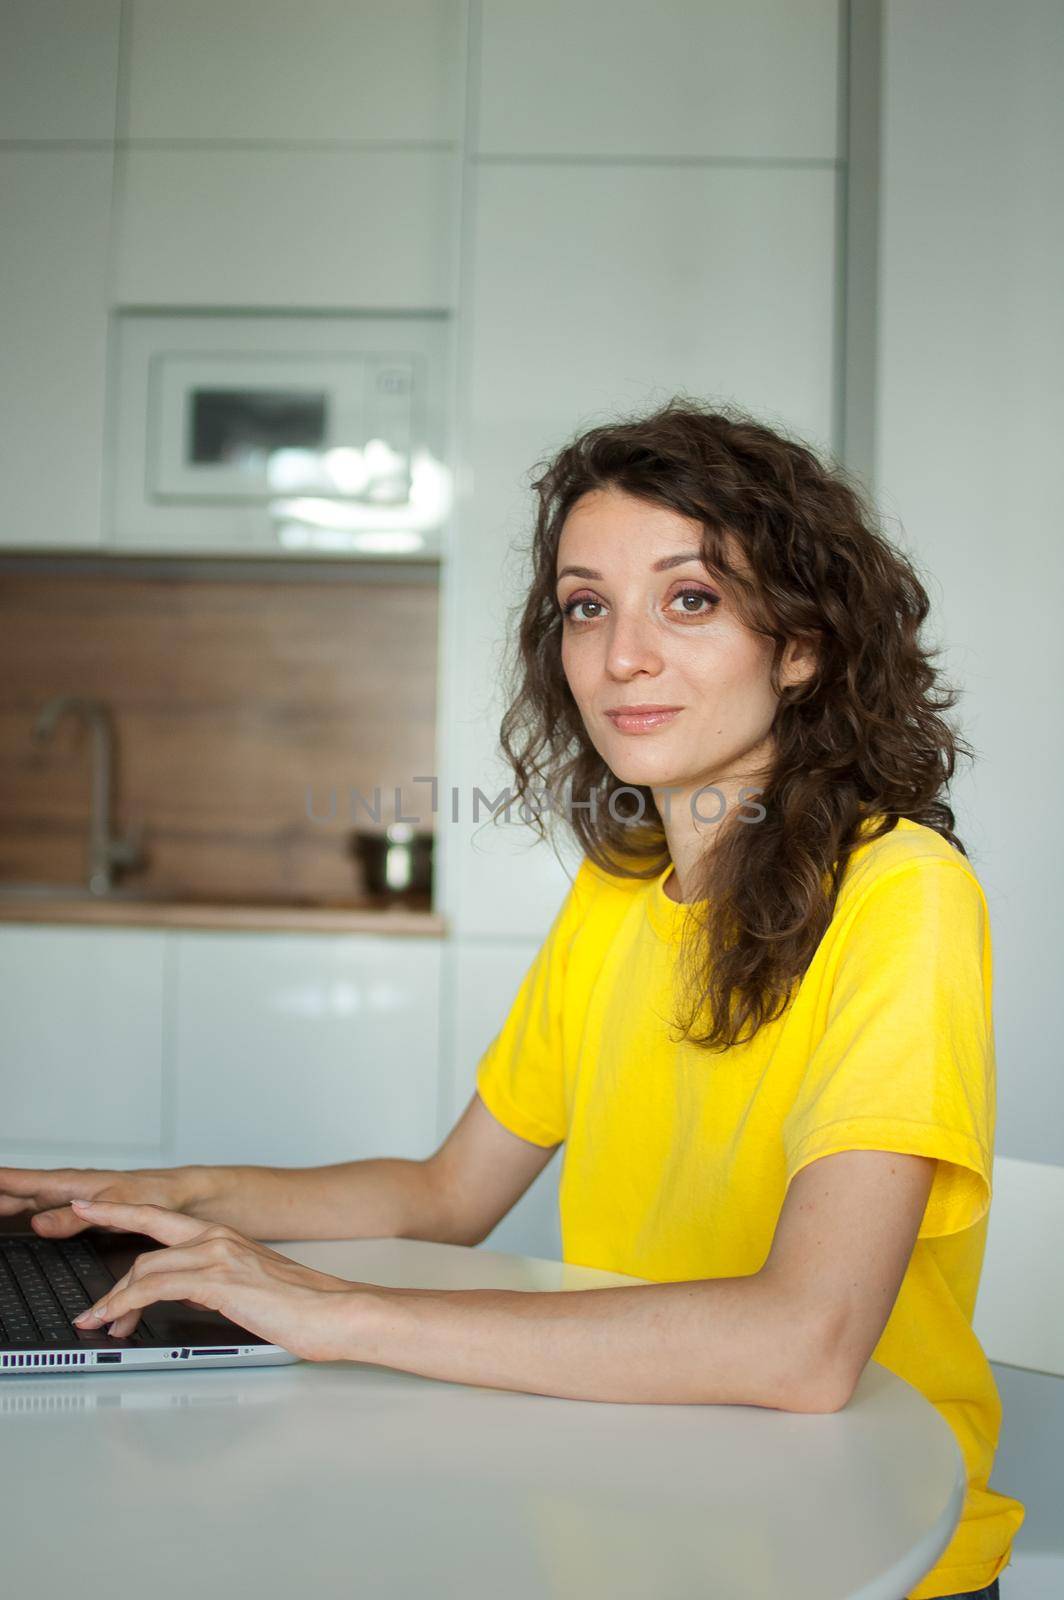 Young woman with curly hair and yellow shirt is working from home using her laptop at the kitchen table in her apartment, remote work, freelance by balinska_lv